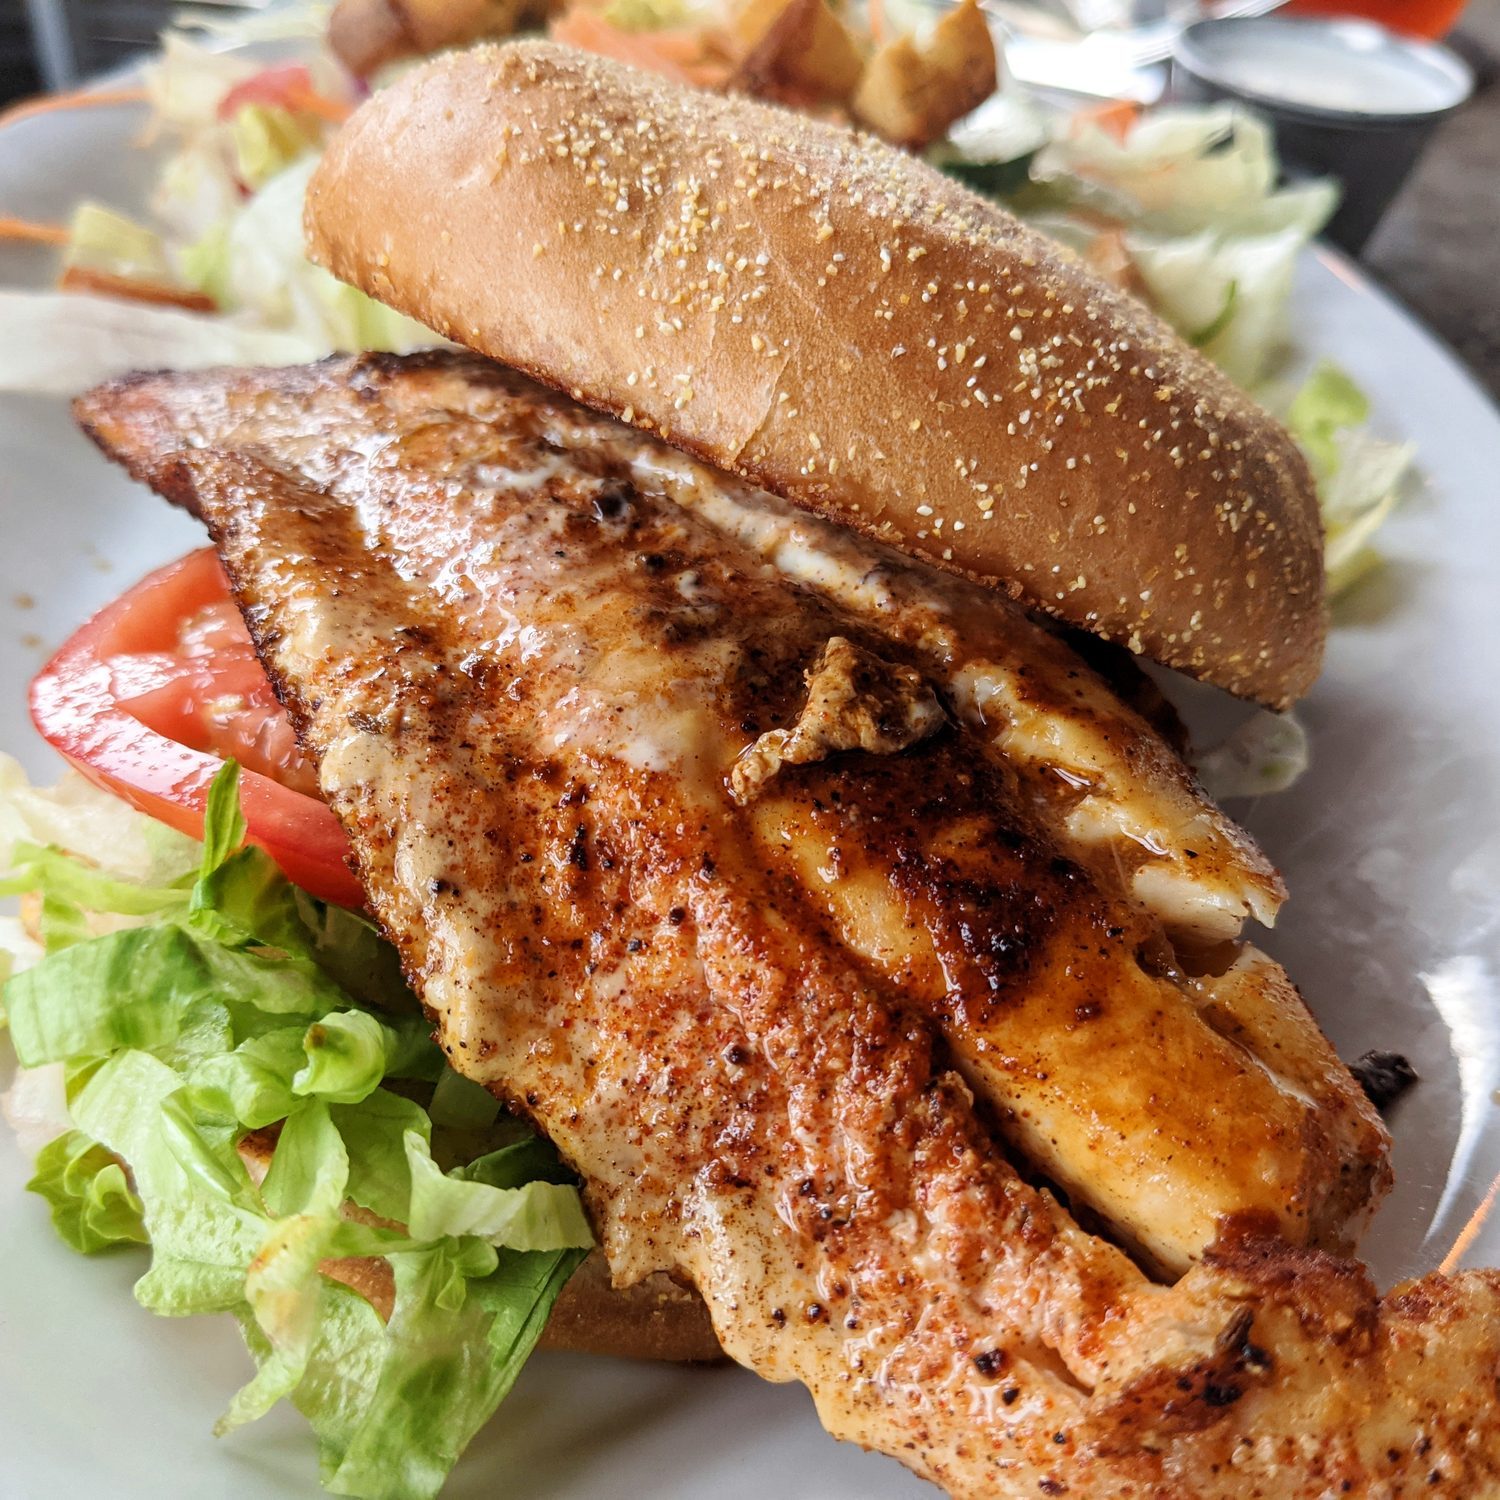 blackened halibut sandwich with lettuce and tomato